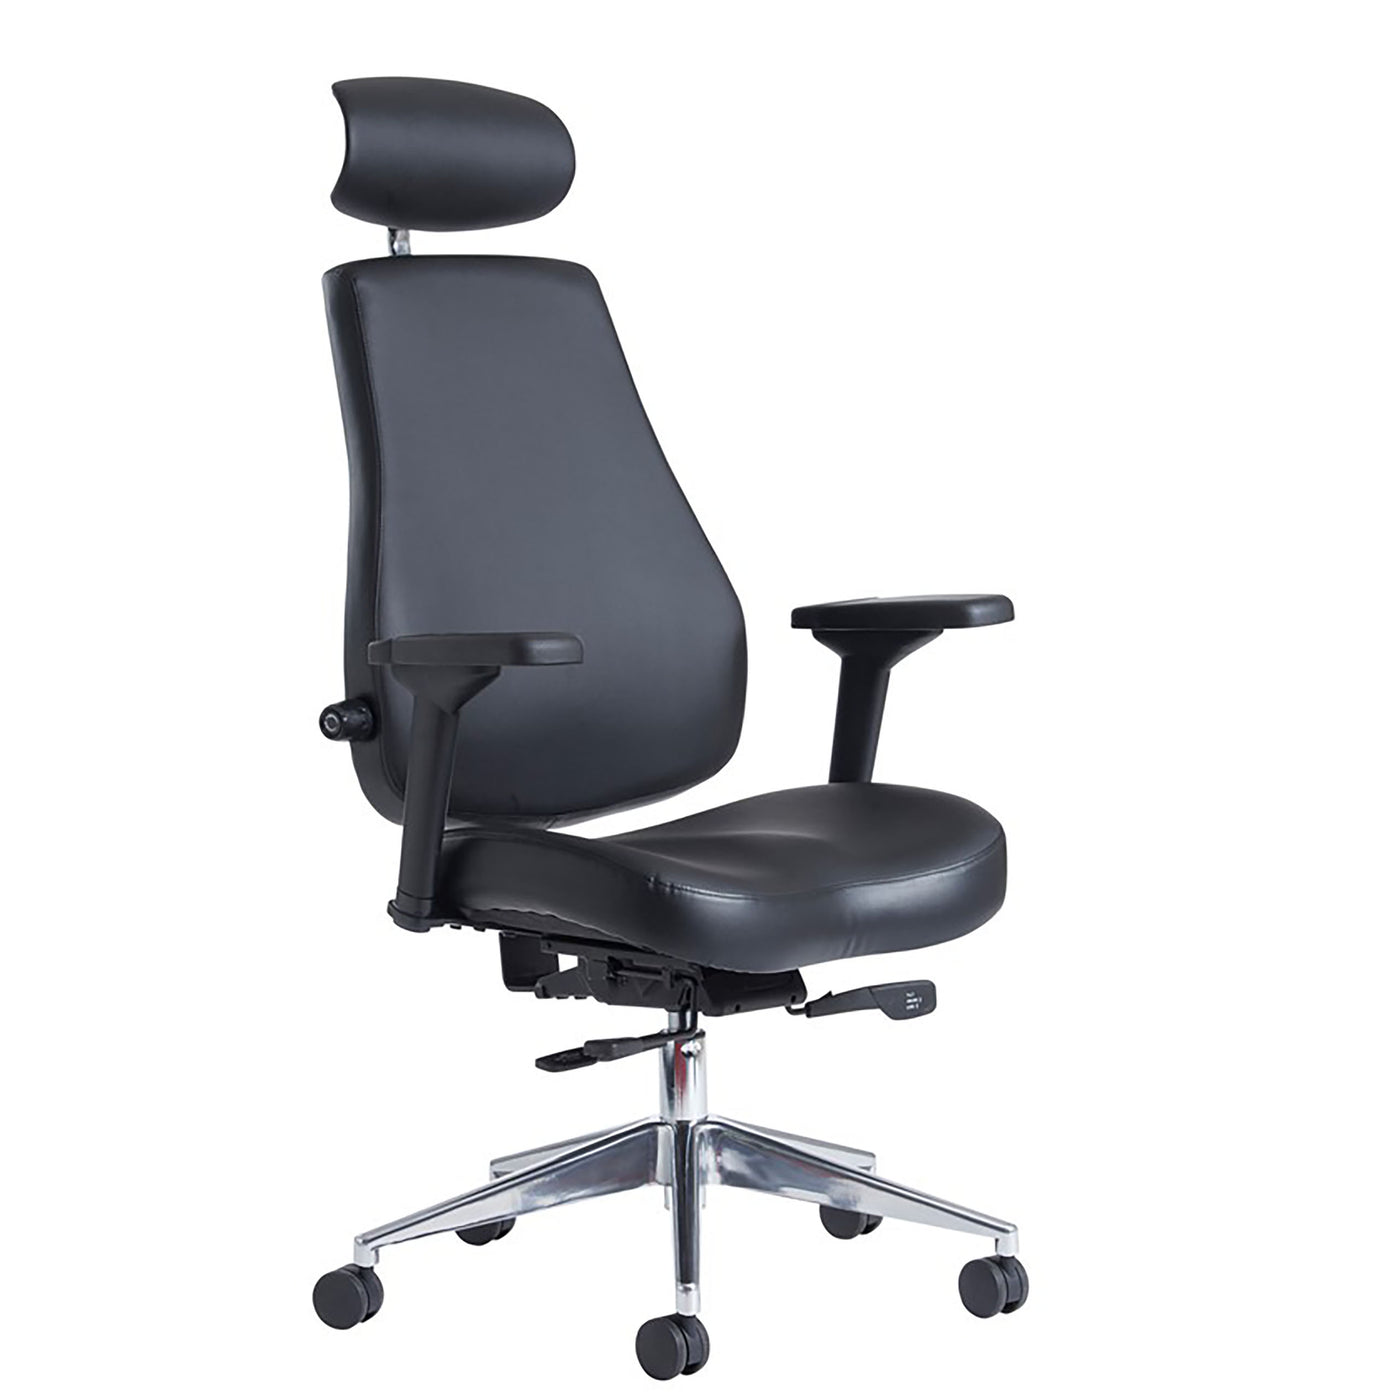 Franklin High Back Faux Leather Home Office Chair | Home Office Furniture | Ergonomic Home Office Furniture